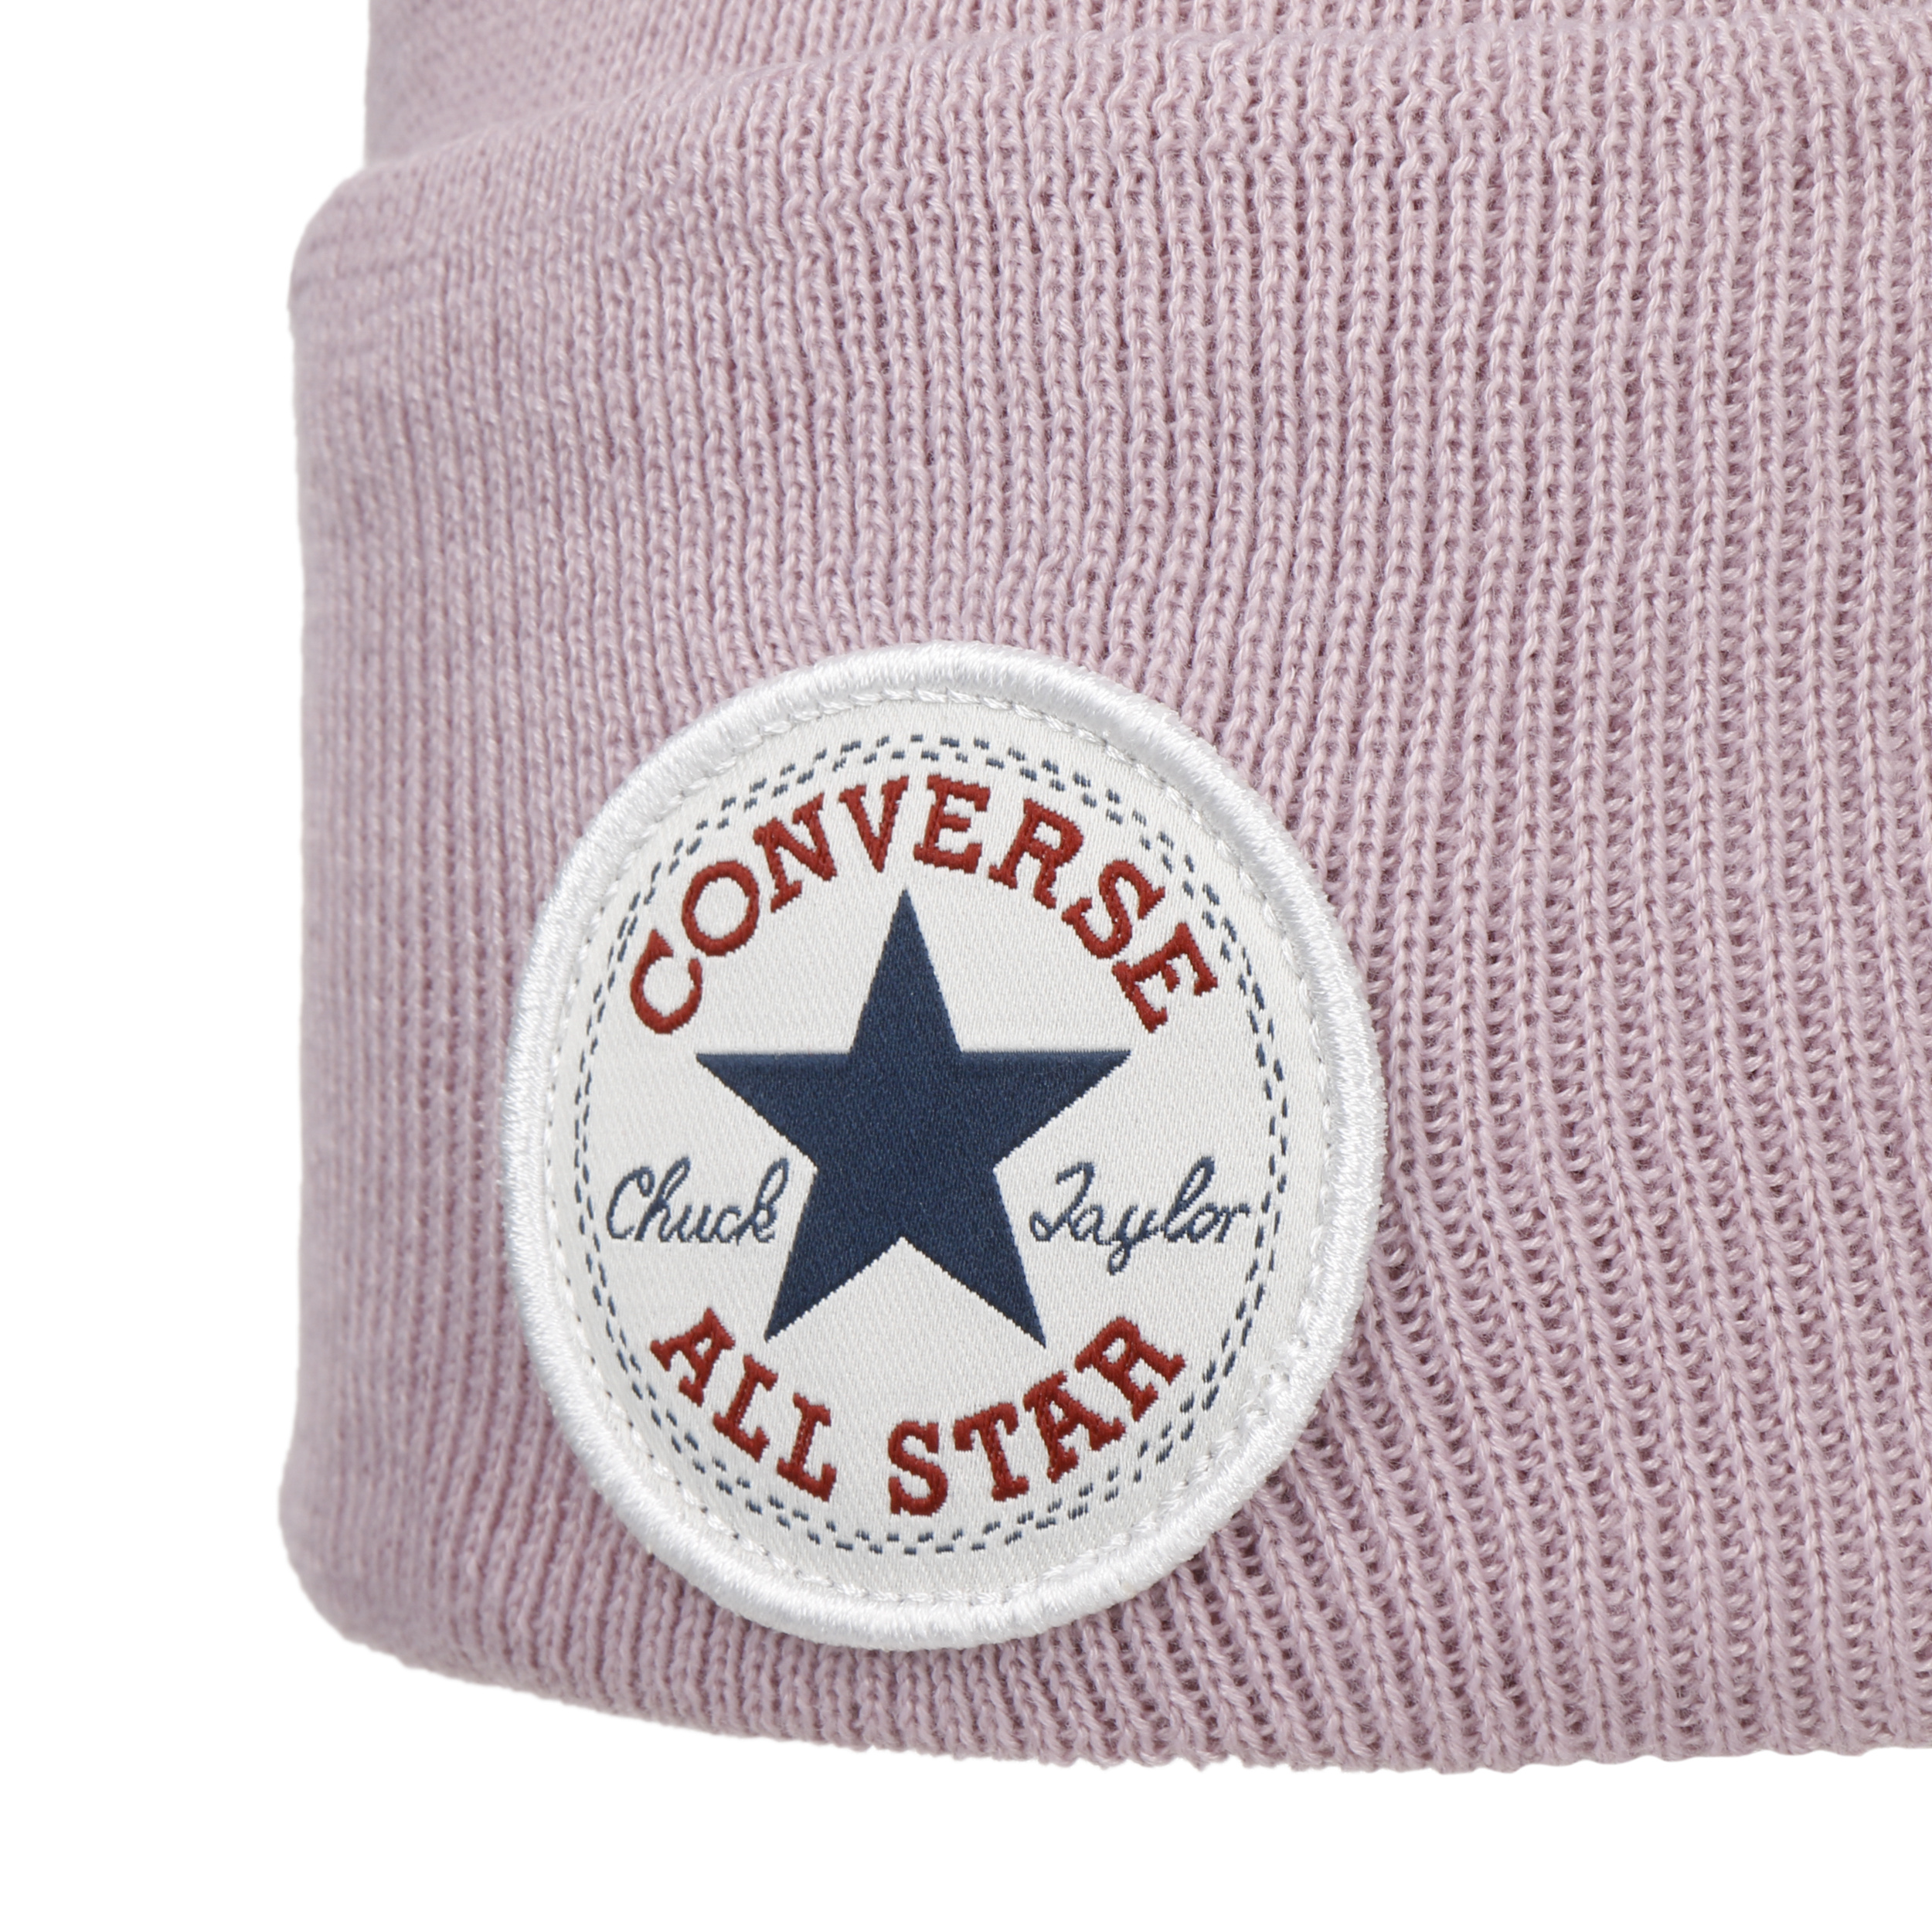 Chuck Patch Beanie Hat by Converse - 32,95 €